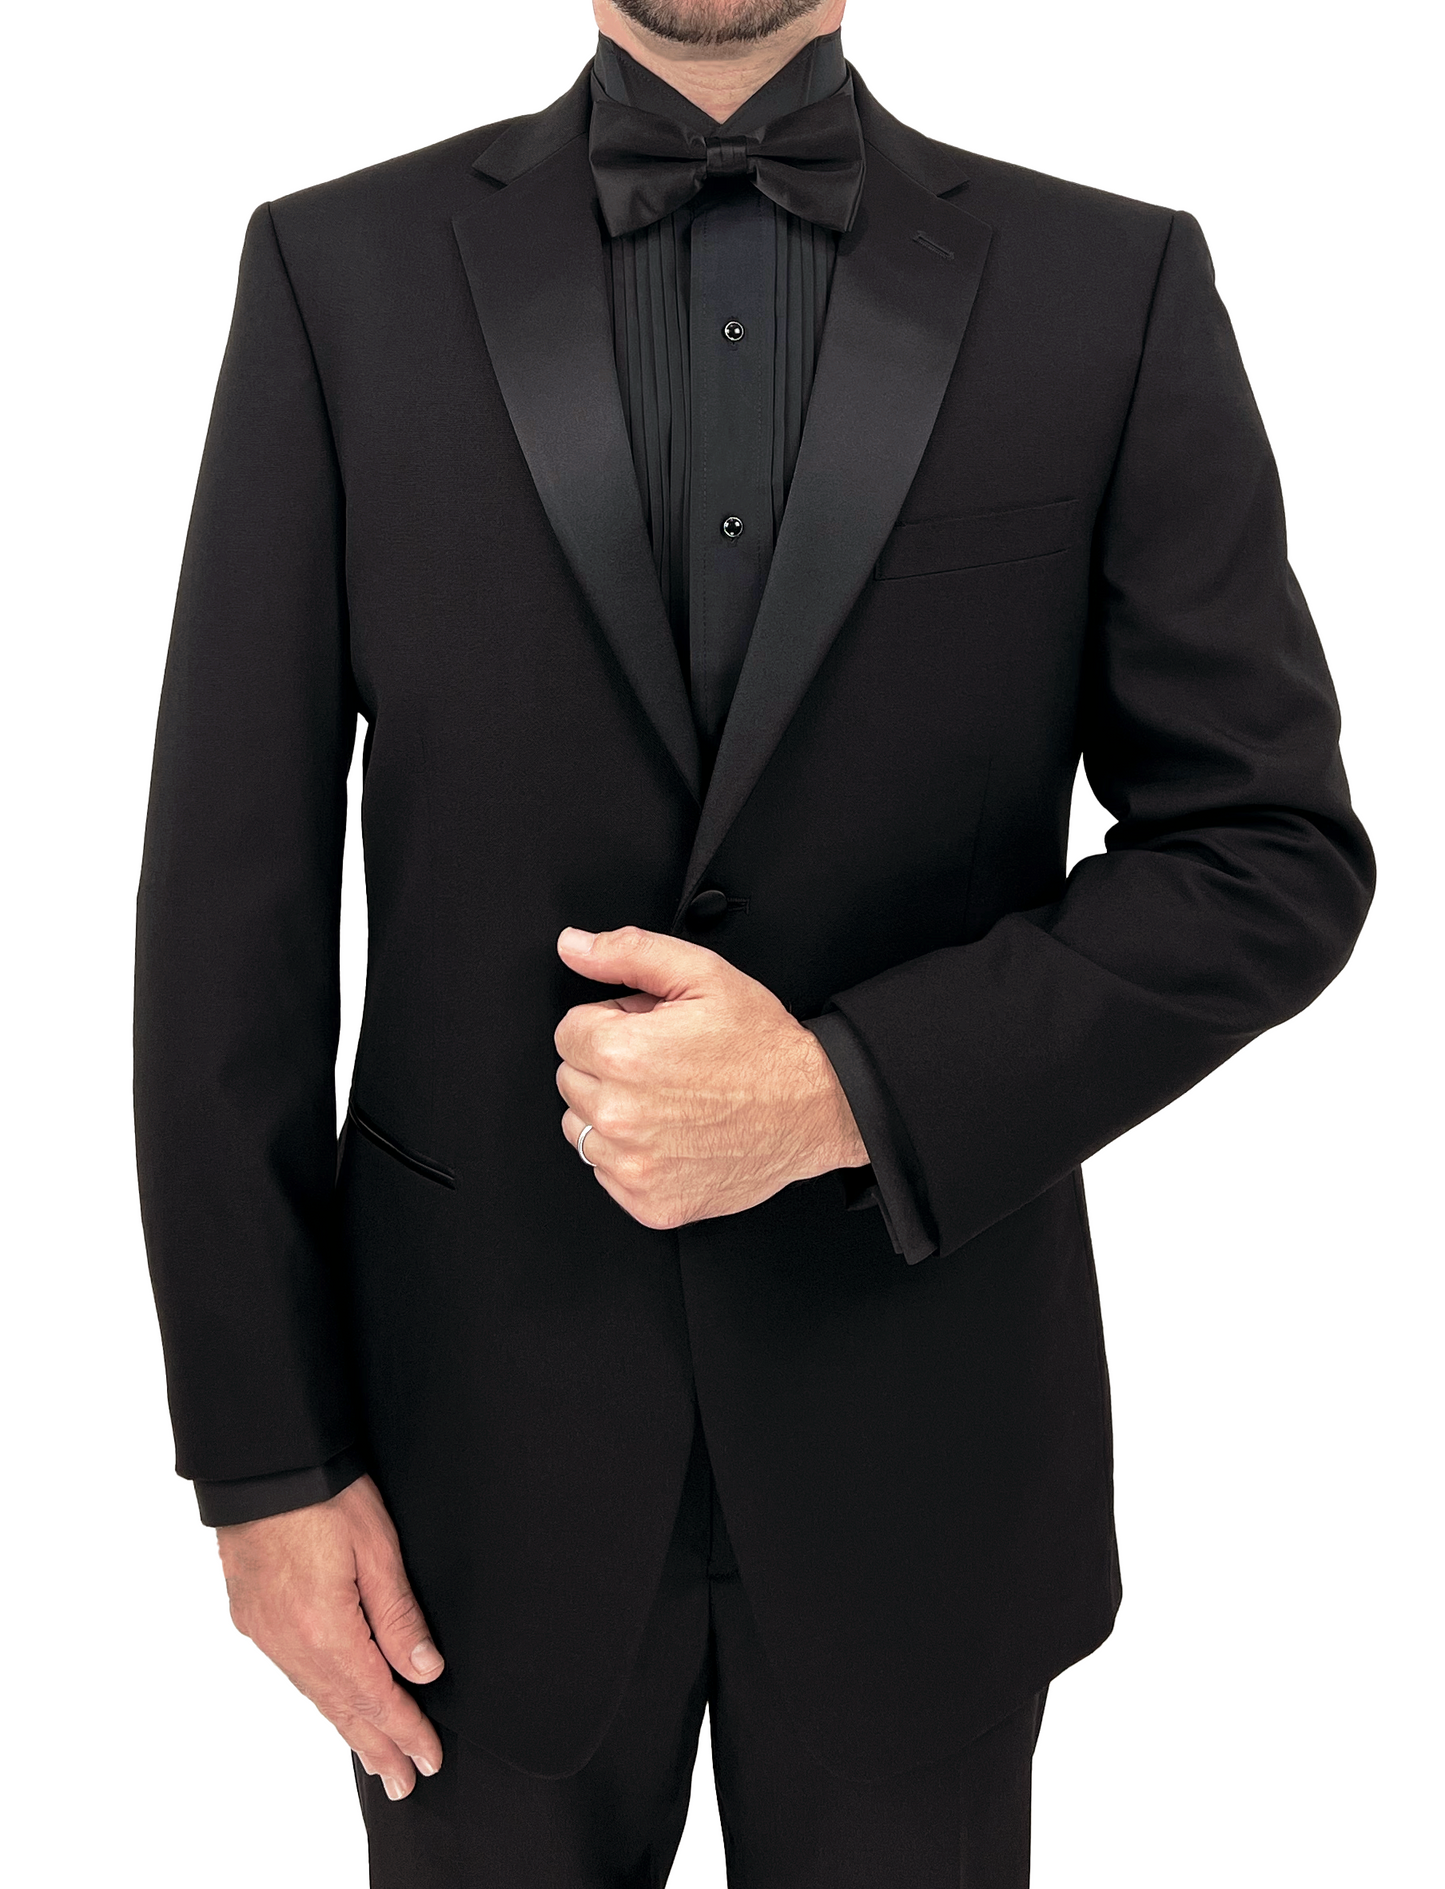 Sir Gregory's Fitted Wool Tuxedo Jacket (Separates) Two-Button Tux Blazer with Satin Notch Lapel